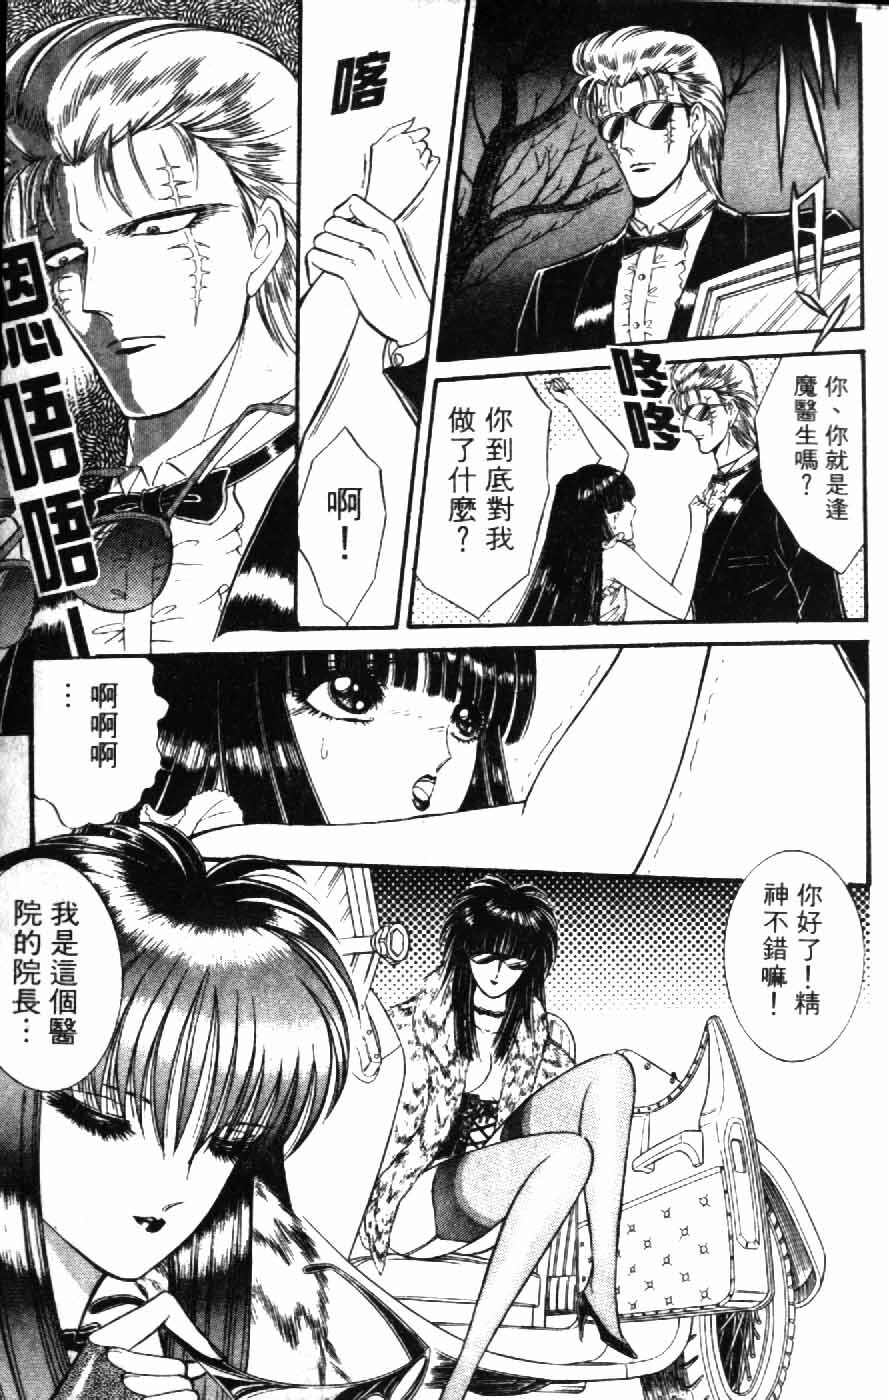 [Senno Knife] Ouma ga Horror Show 1 - Trans Sexual Special Show 1 | 顫慄博覽會 1 [Chinese] page 11 full